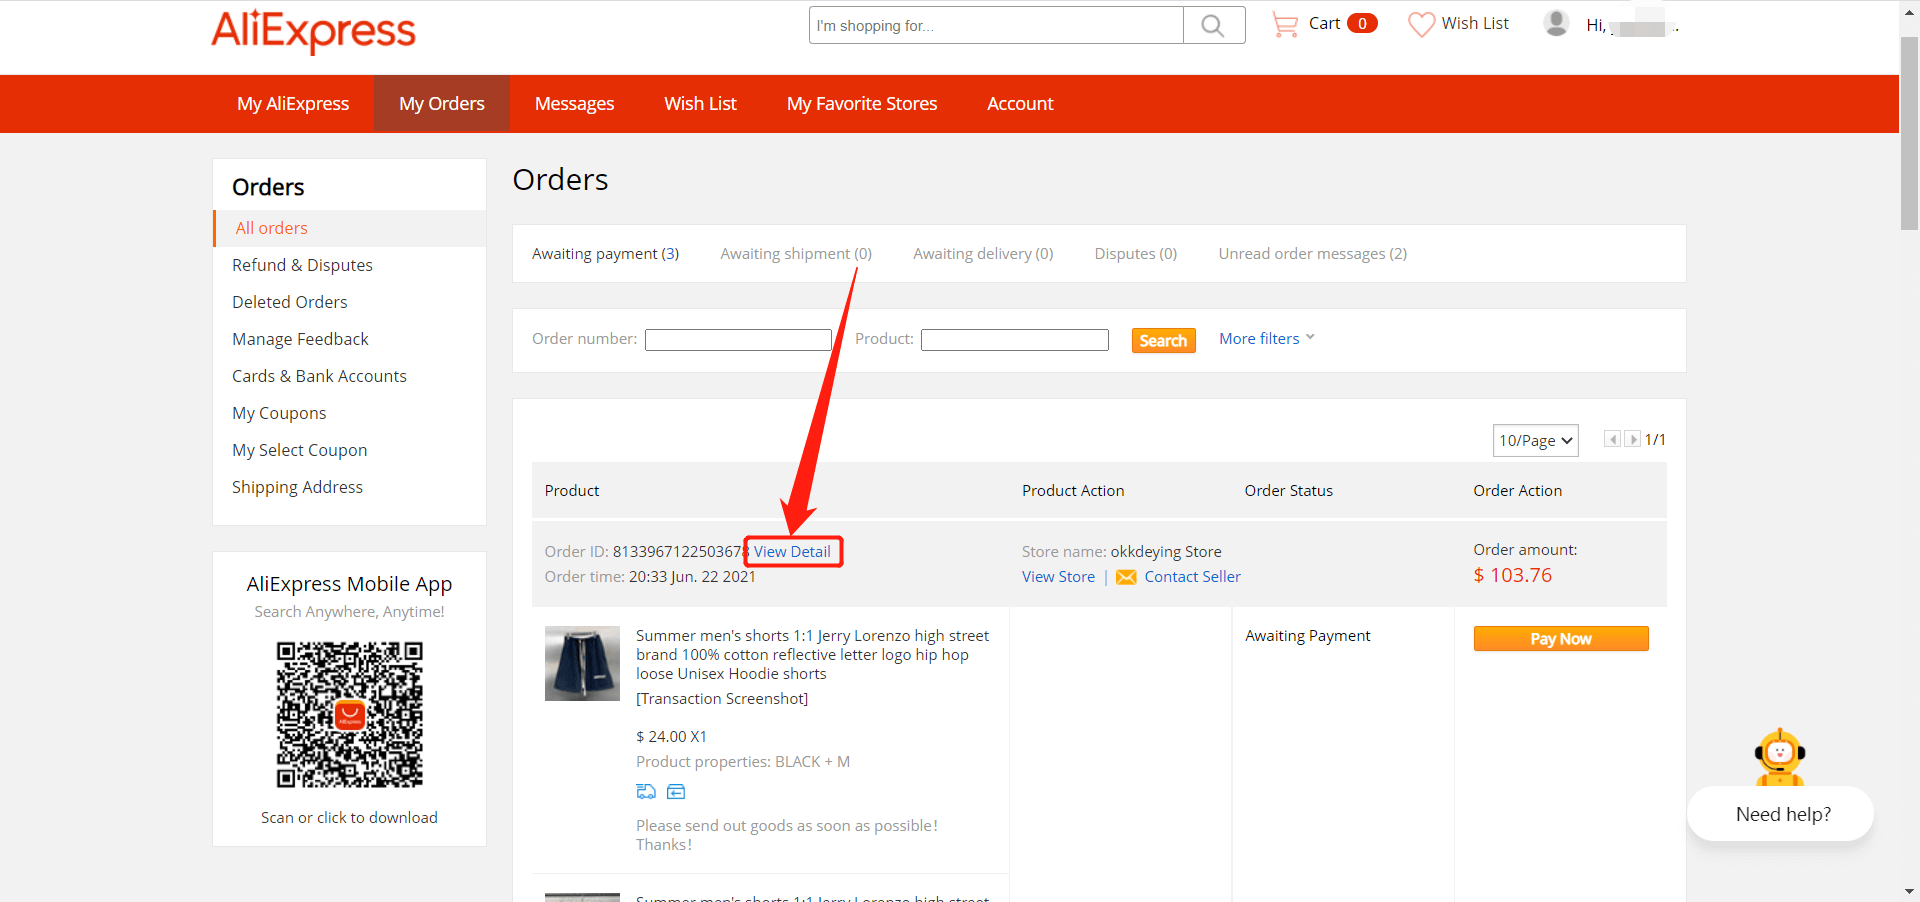 Default message to suppliers - go to AliExpress – Orders and click on View Detail - DSers